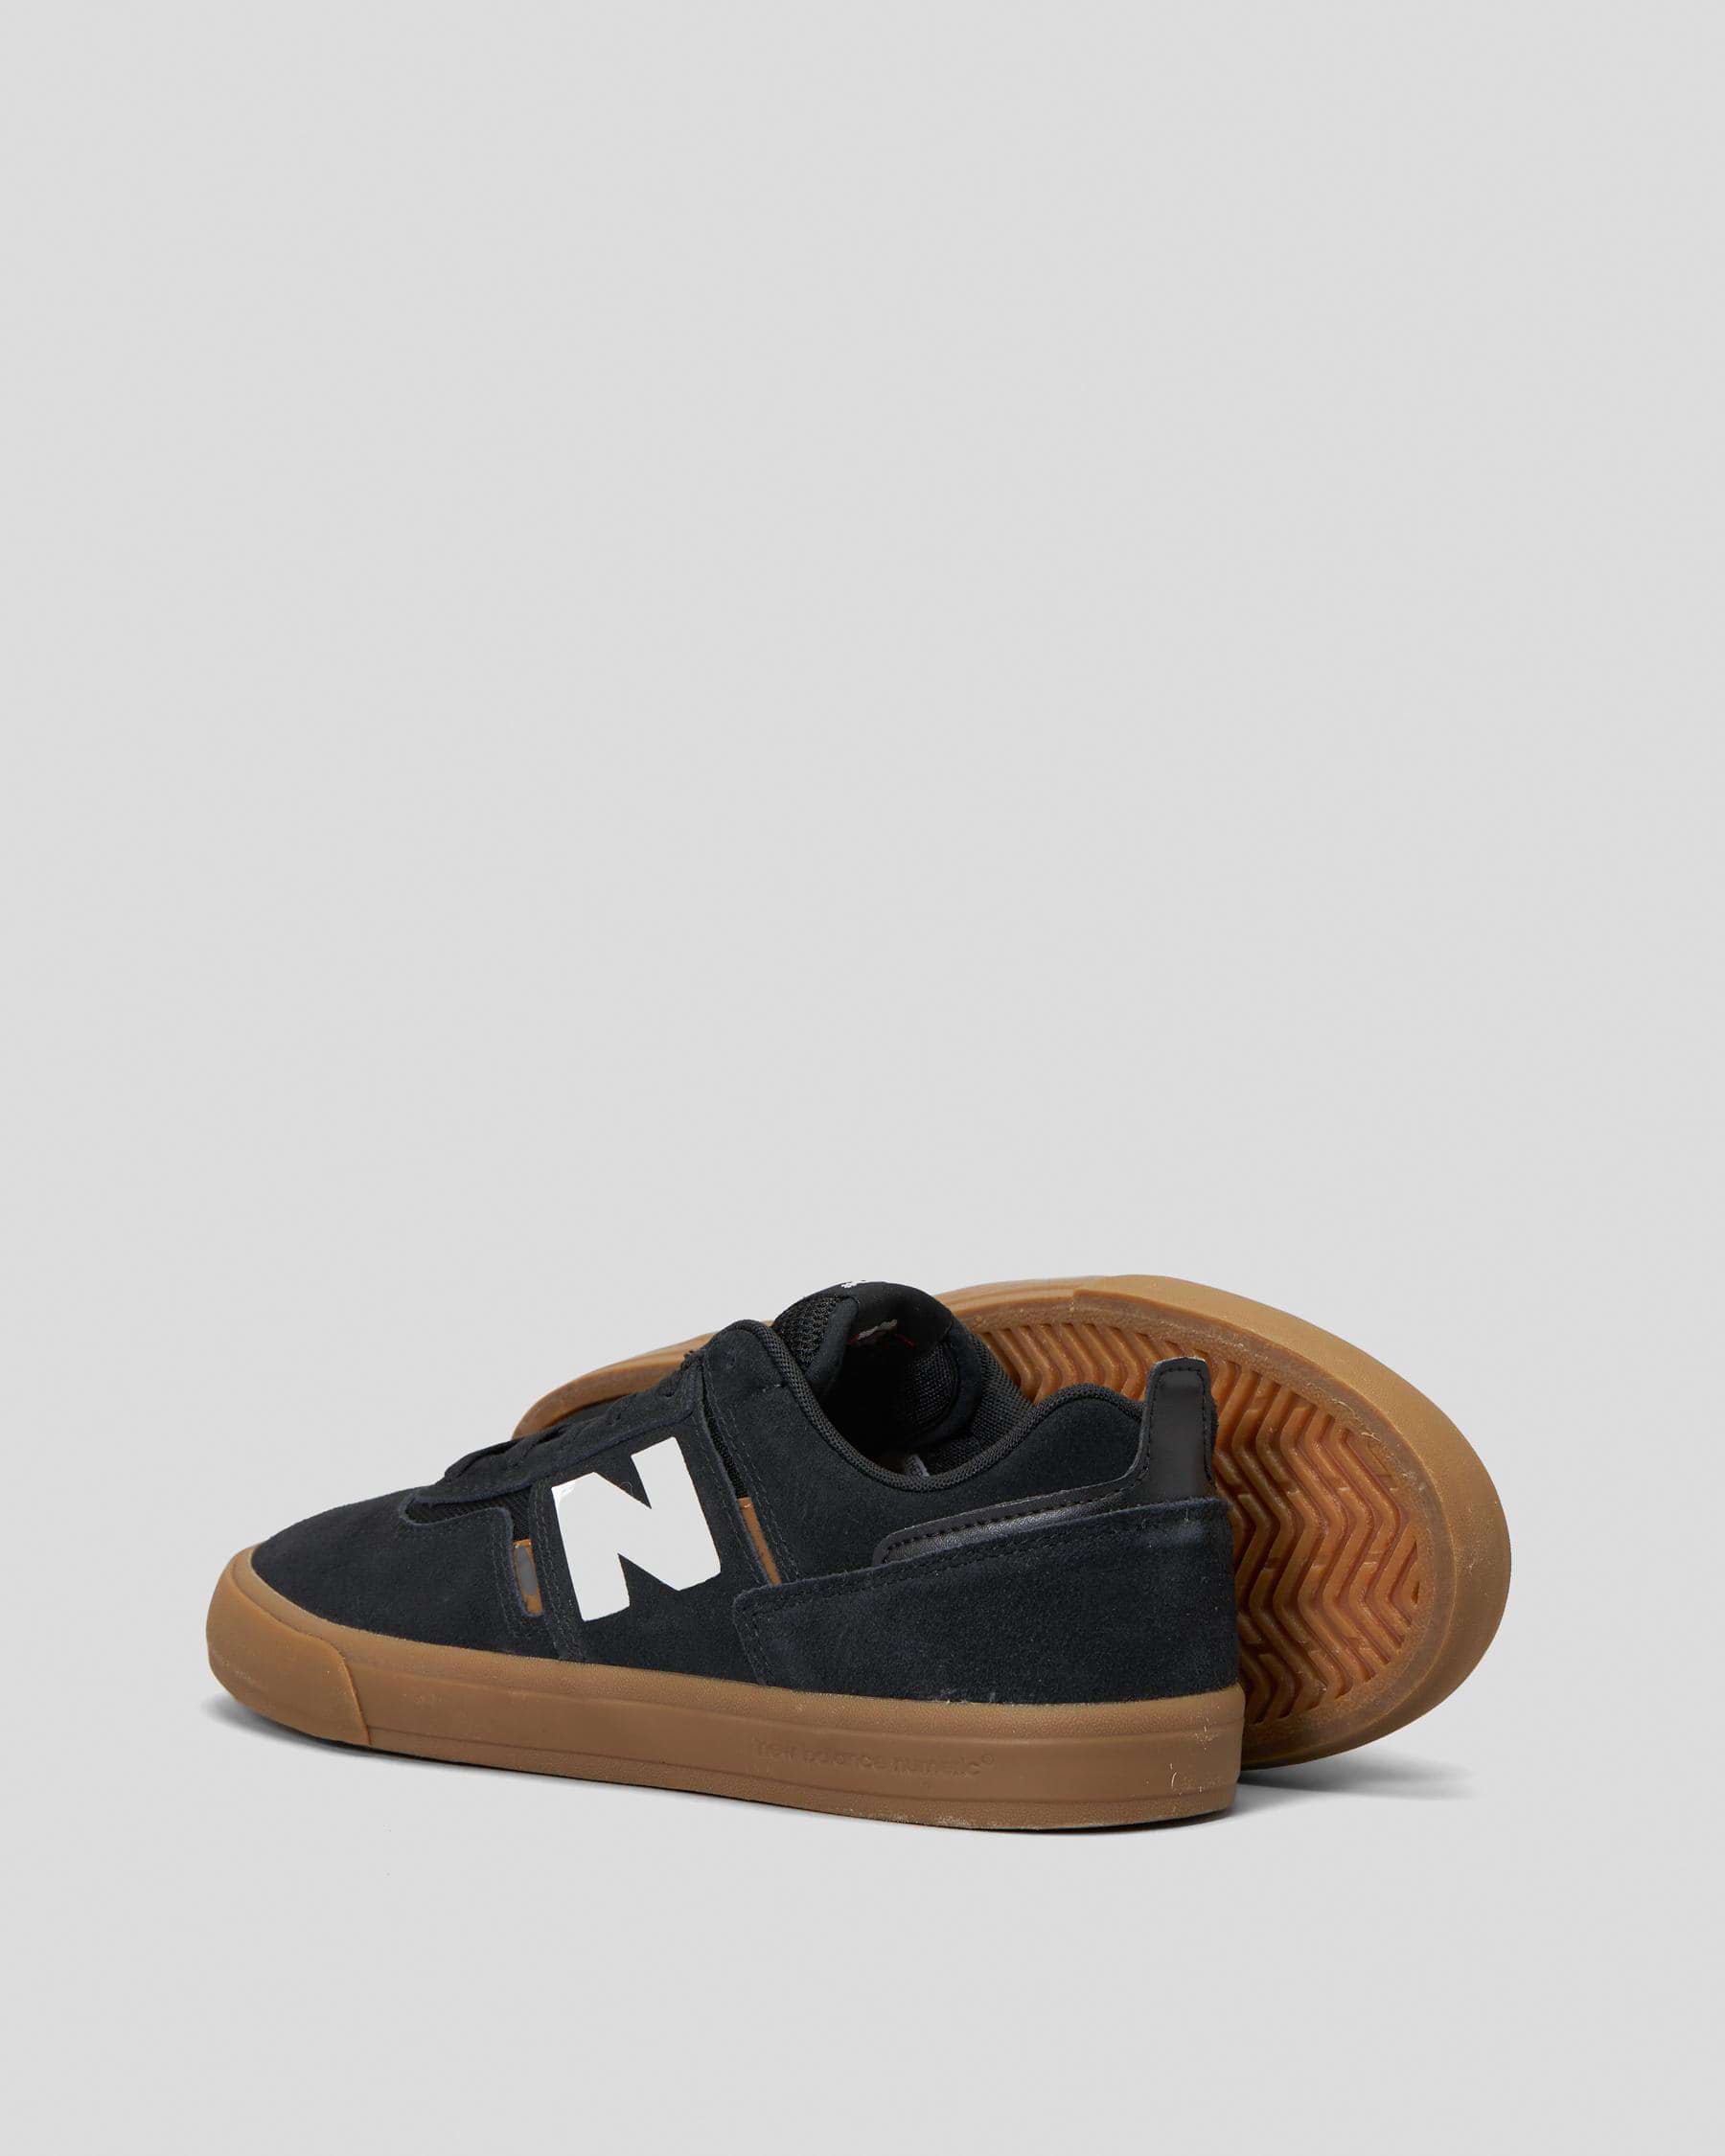 New Balance NB 306 Shoes In Black/gum - Fast Shipping & Easy Returns ...